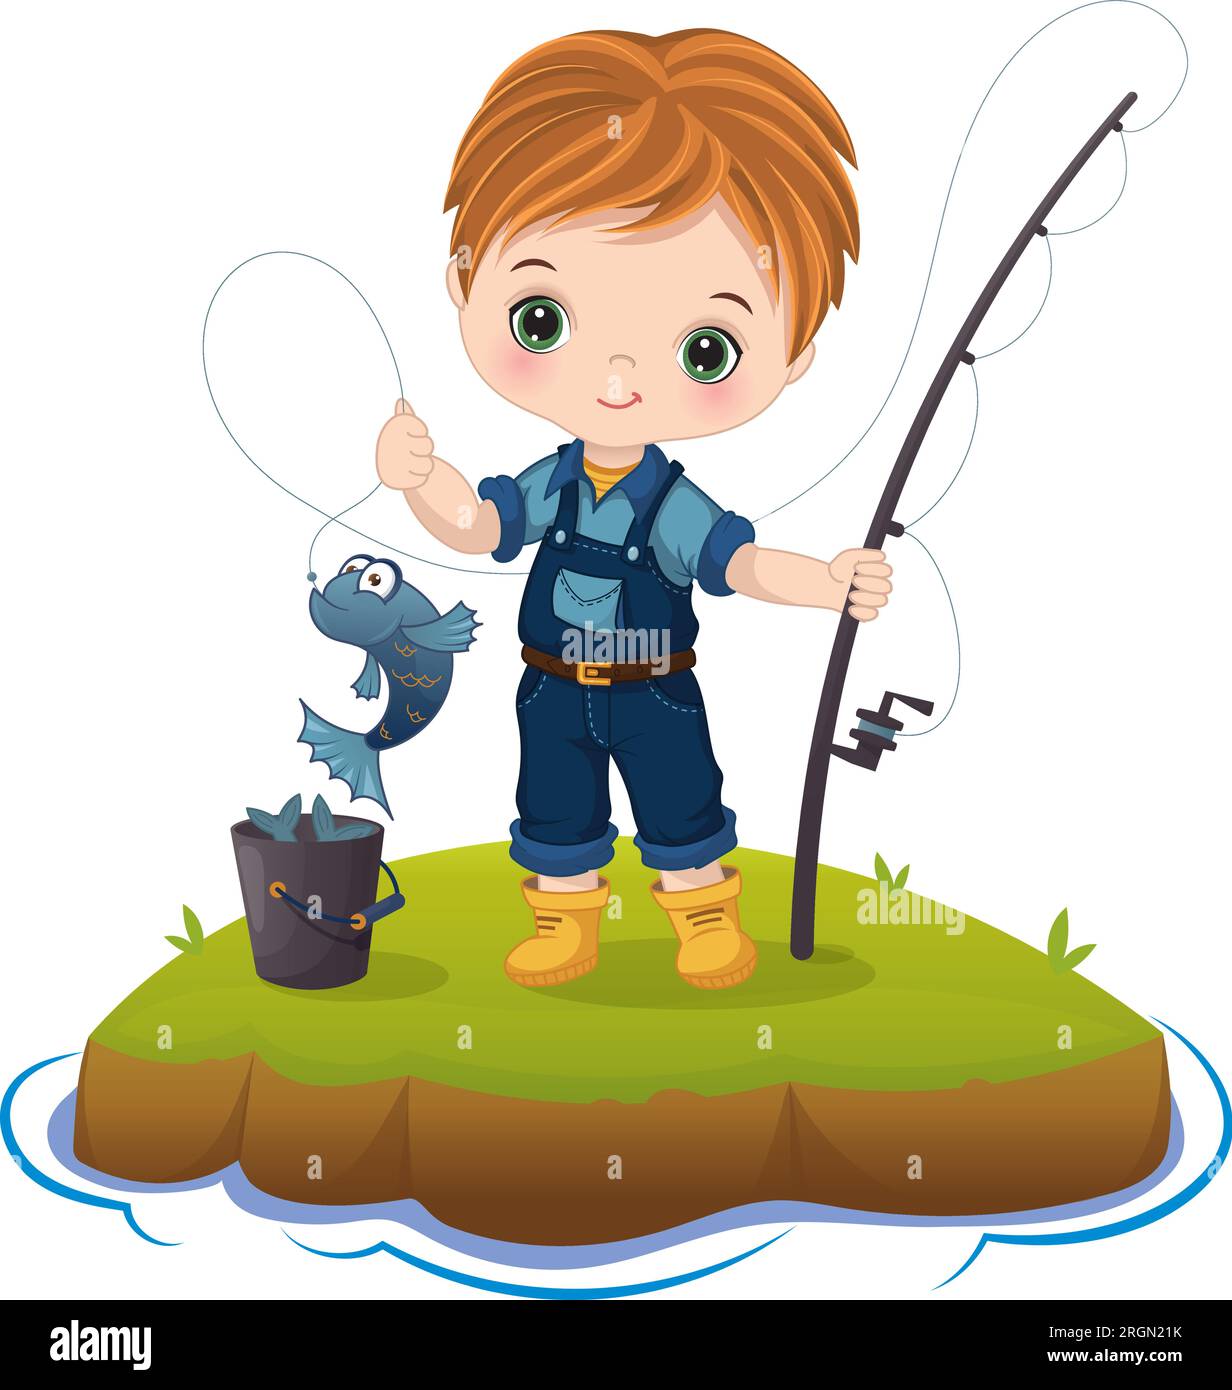 Fisherman small fish Stock Vector Images - Alamy